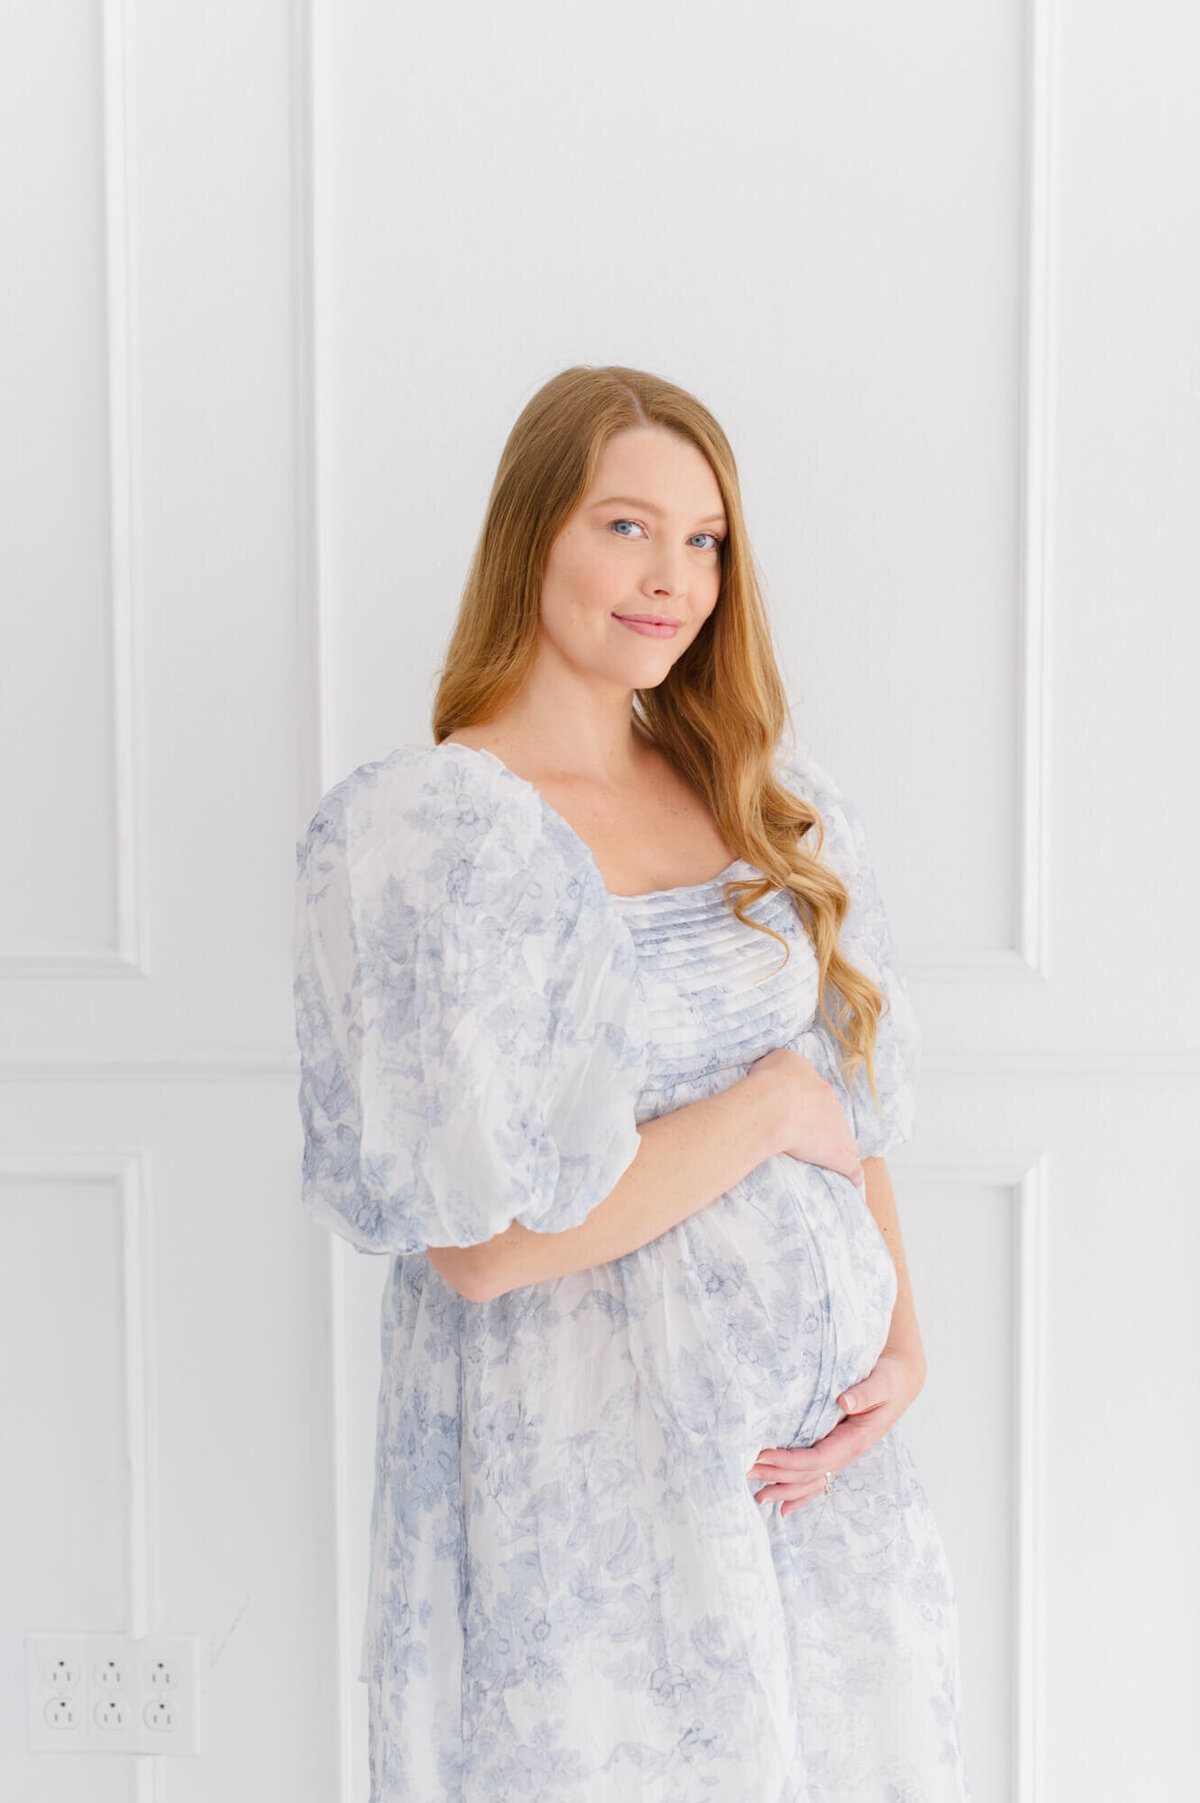 Pregnant mom standing on white wall posing and smiling at the camera